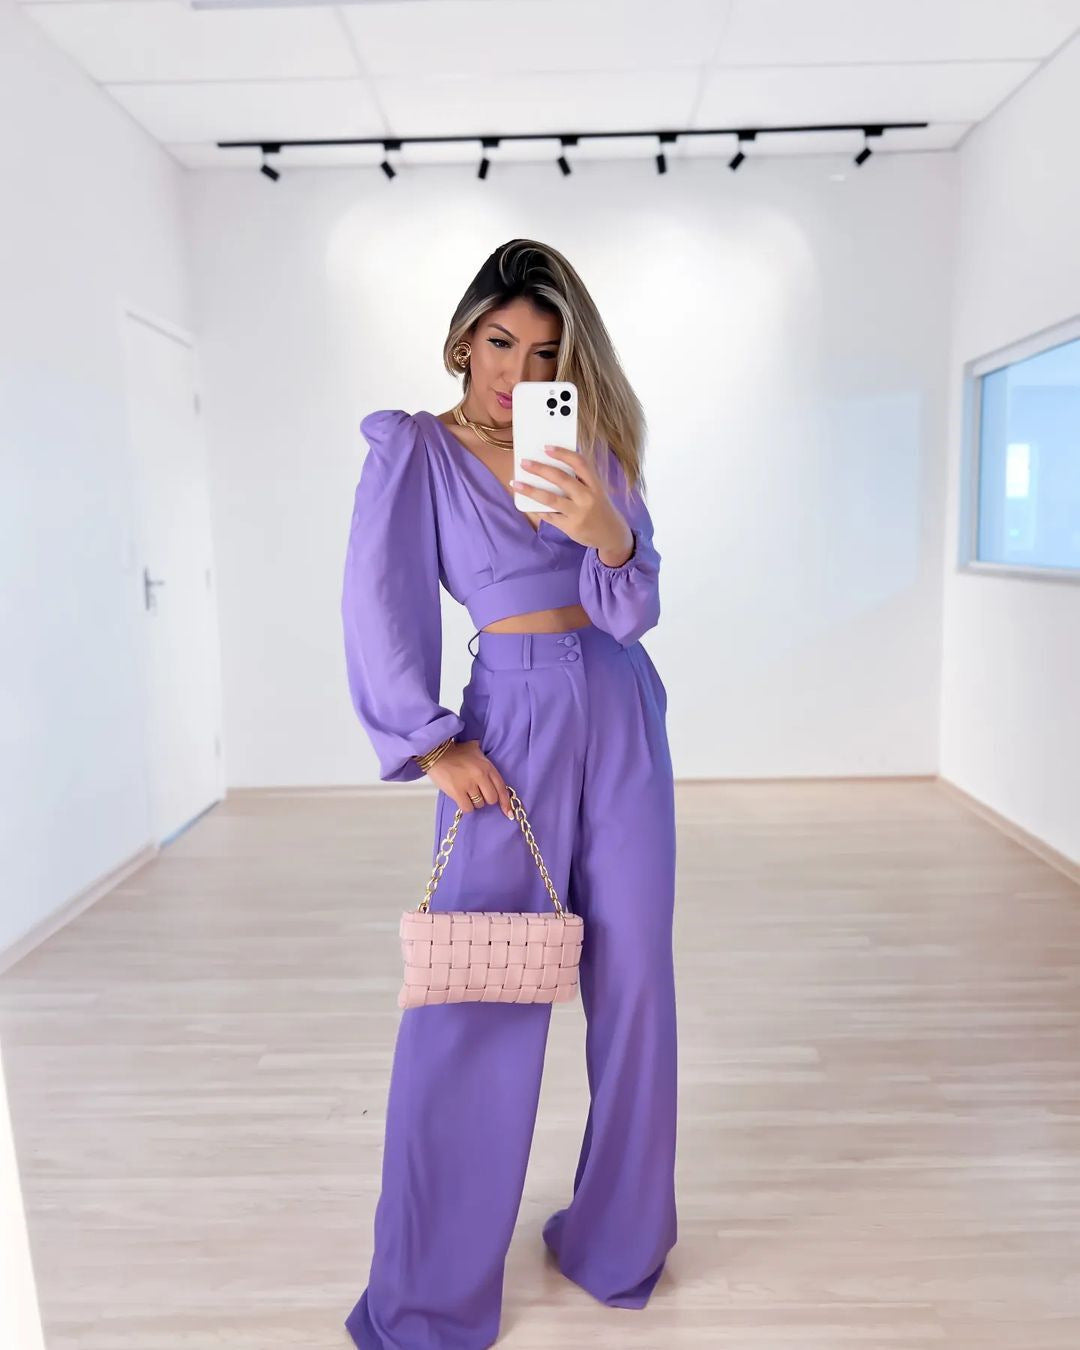 Casual High Waist Spring Wide Legs Women Suits-Suits-Purple-S-Free Shipping Leatheretro